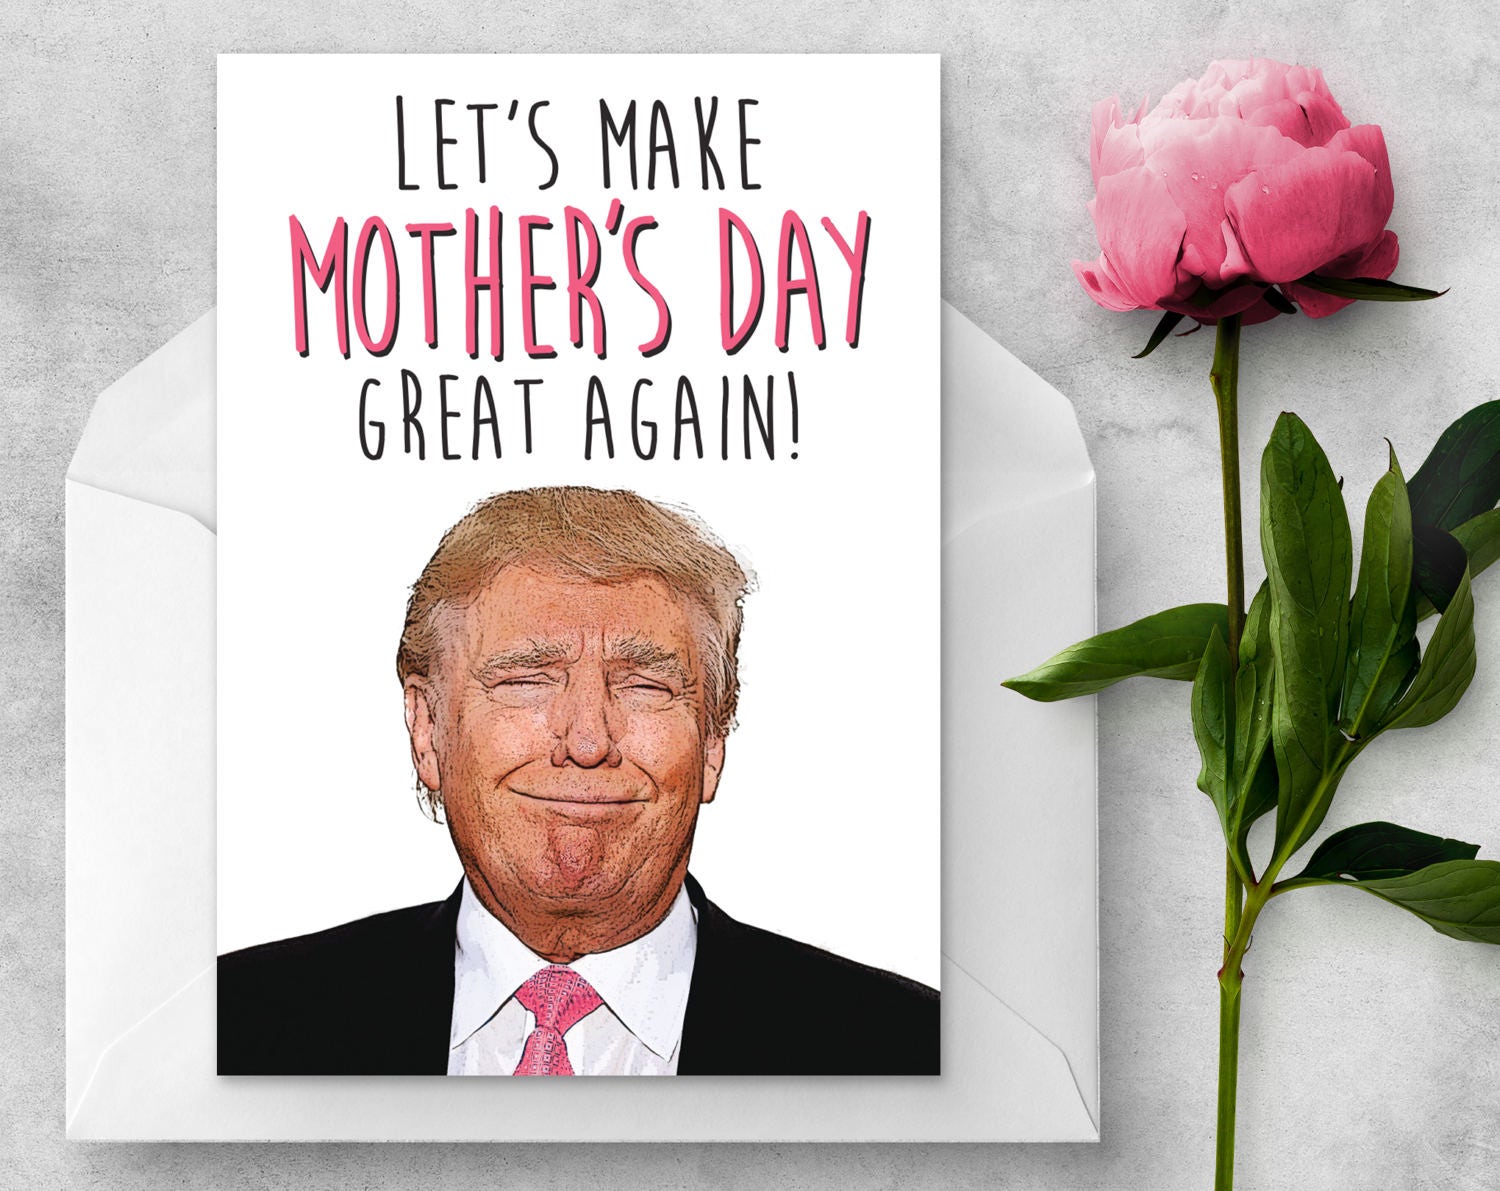 donald-trump-mother-s-day-card-let-s-make